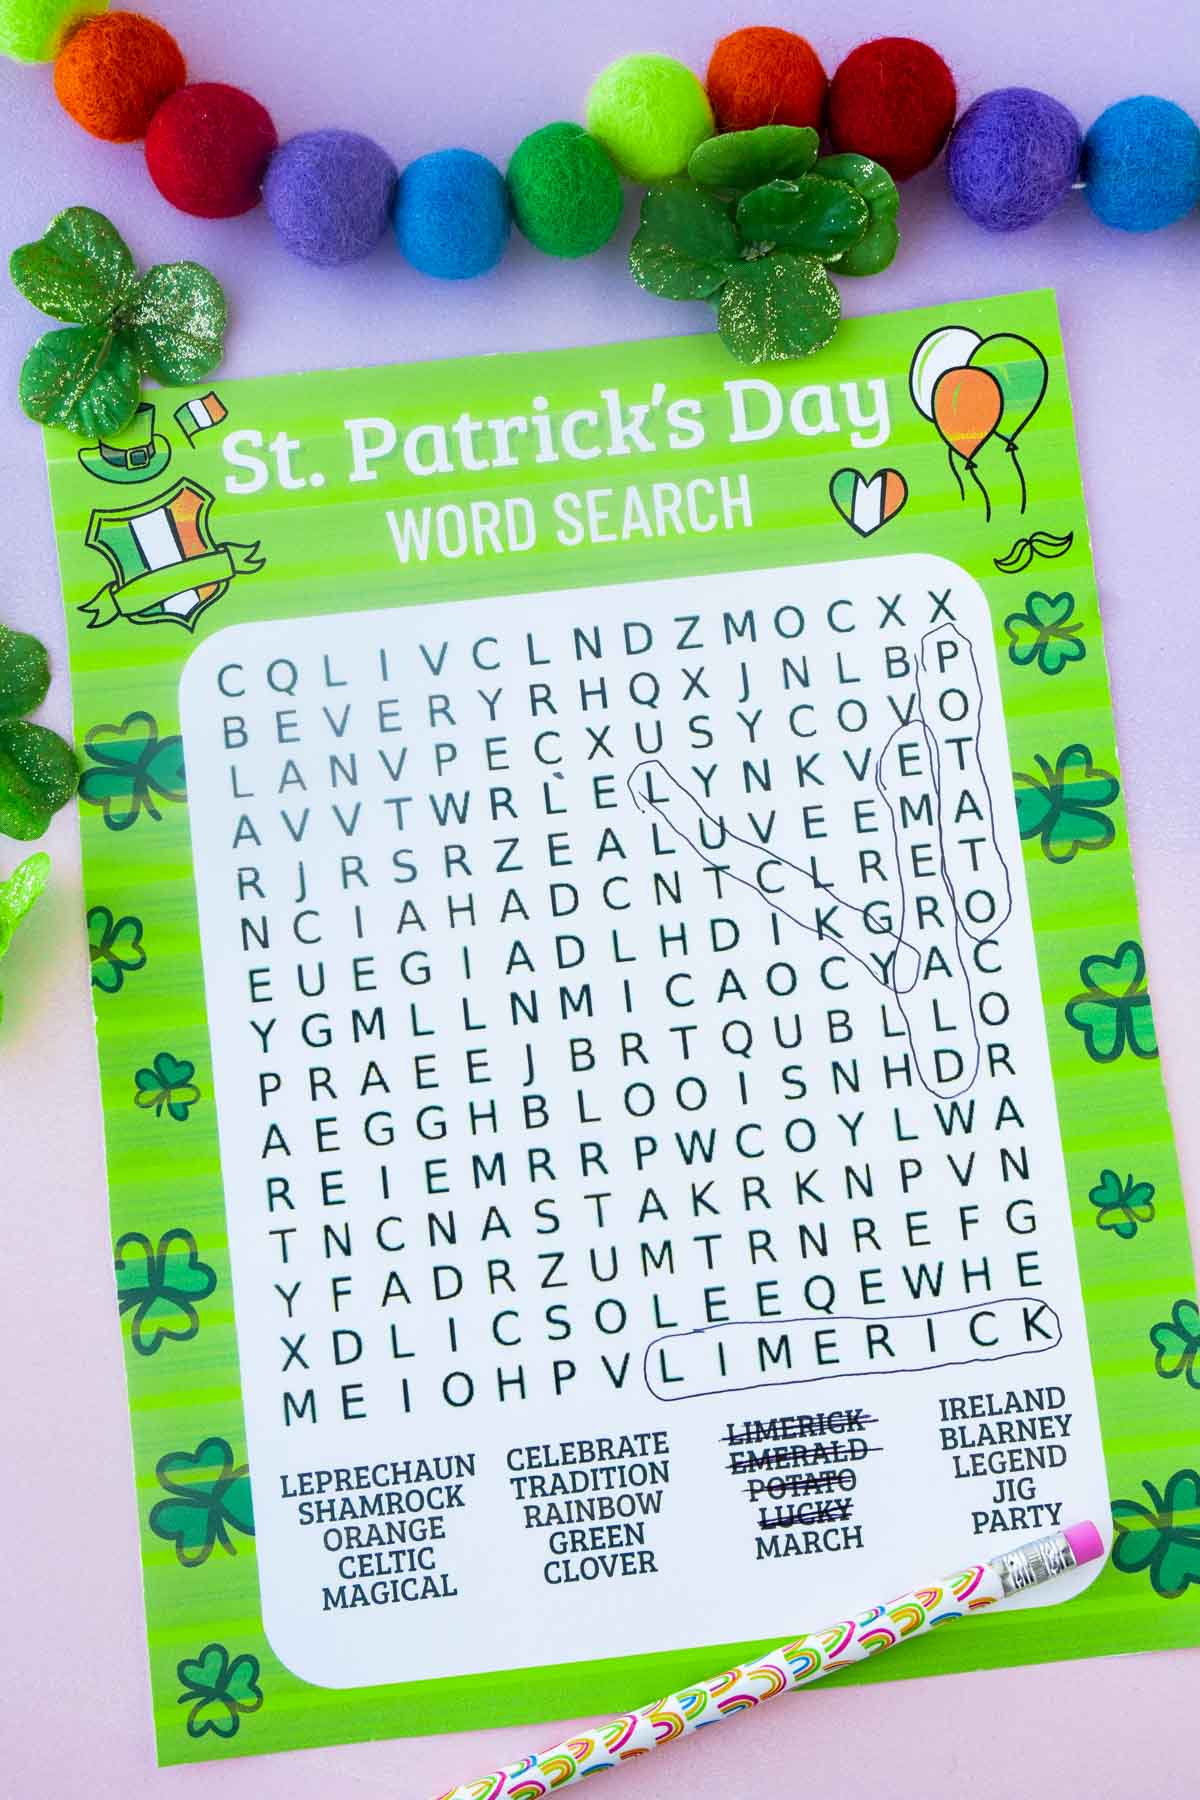 printed out St. Patricks Day word search with shamrocks all around